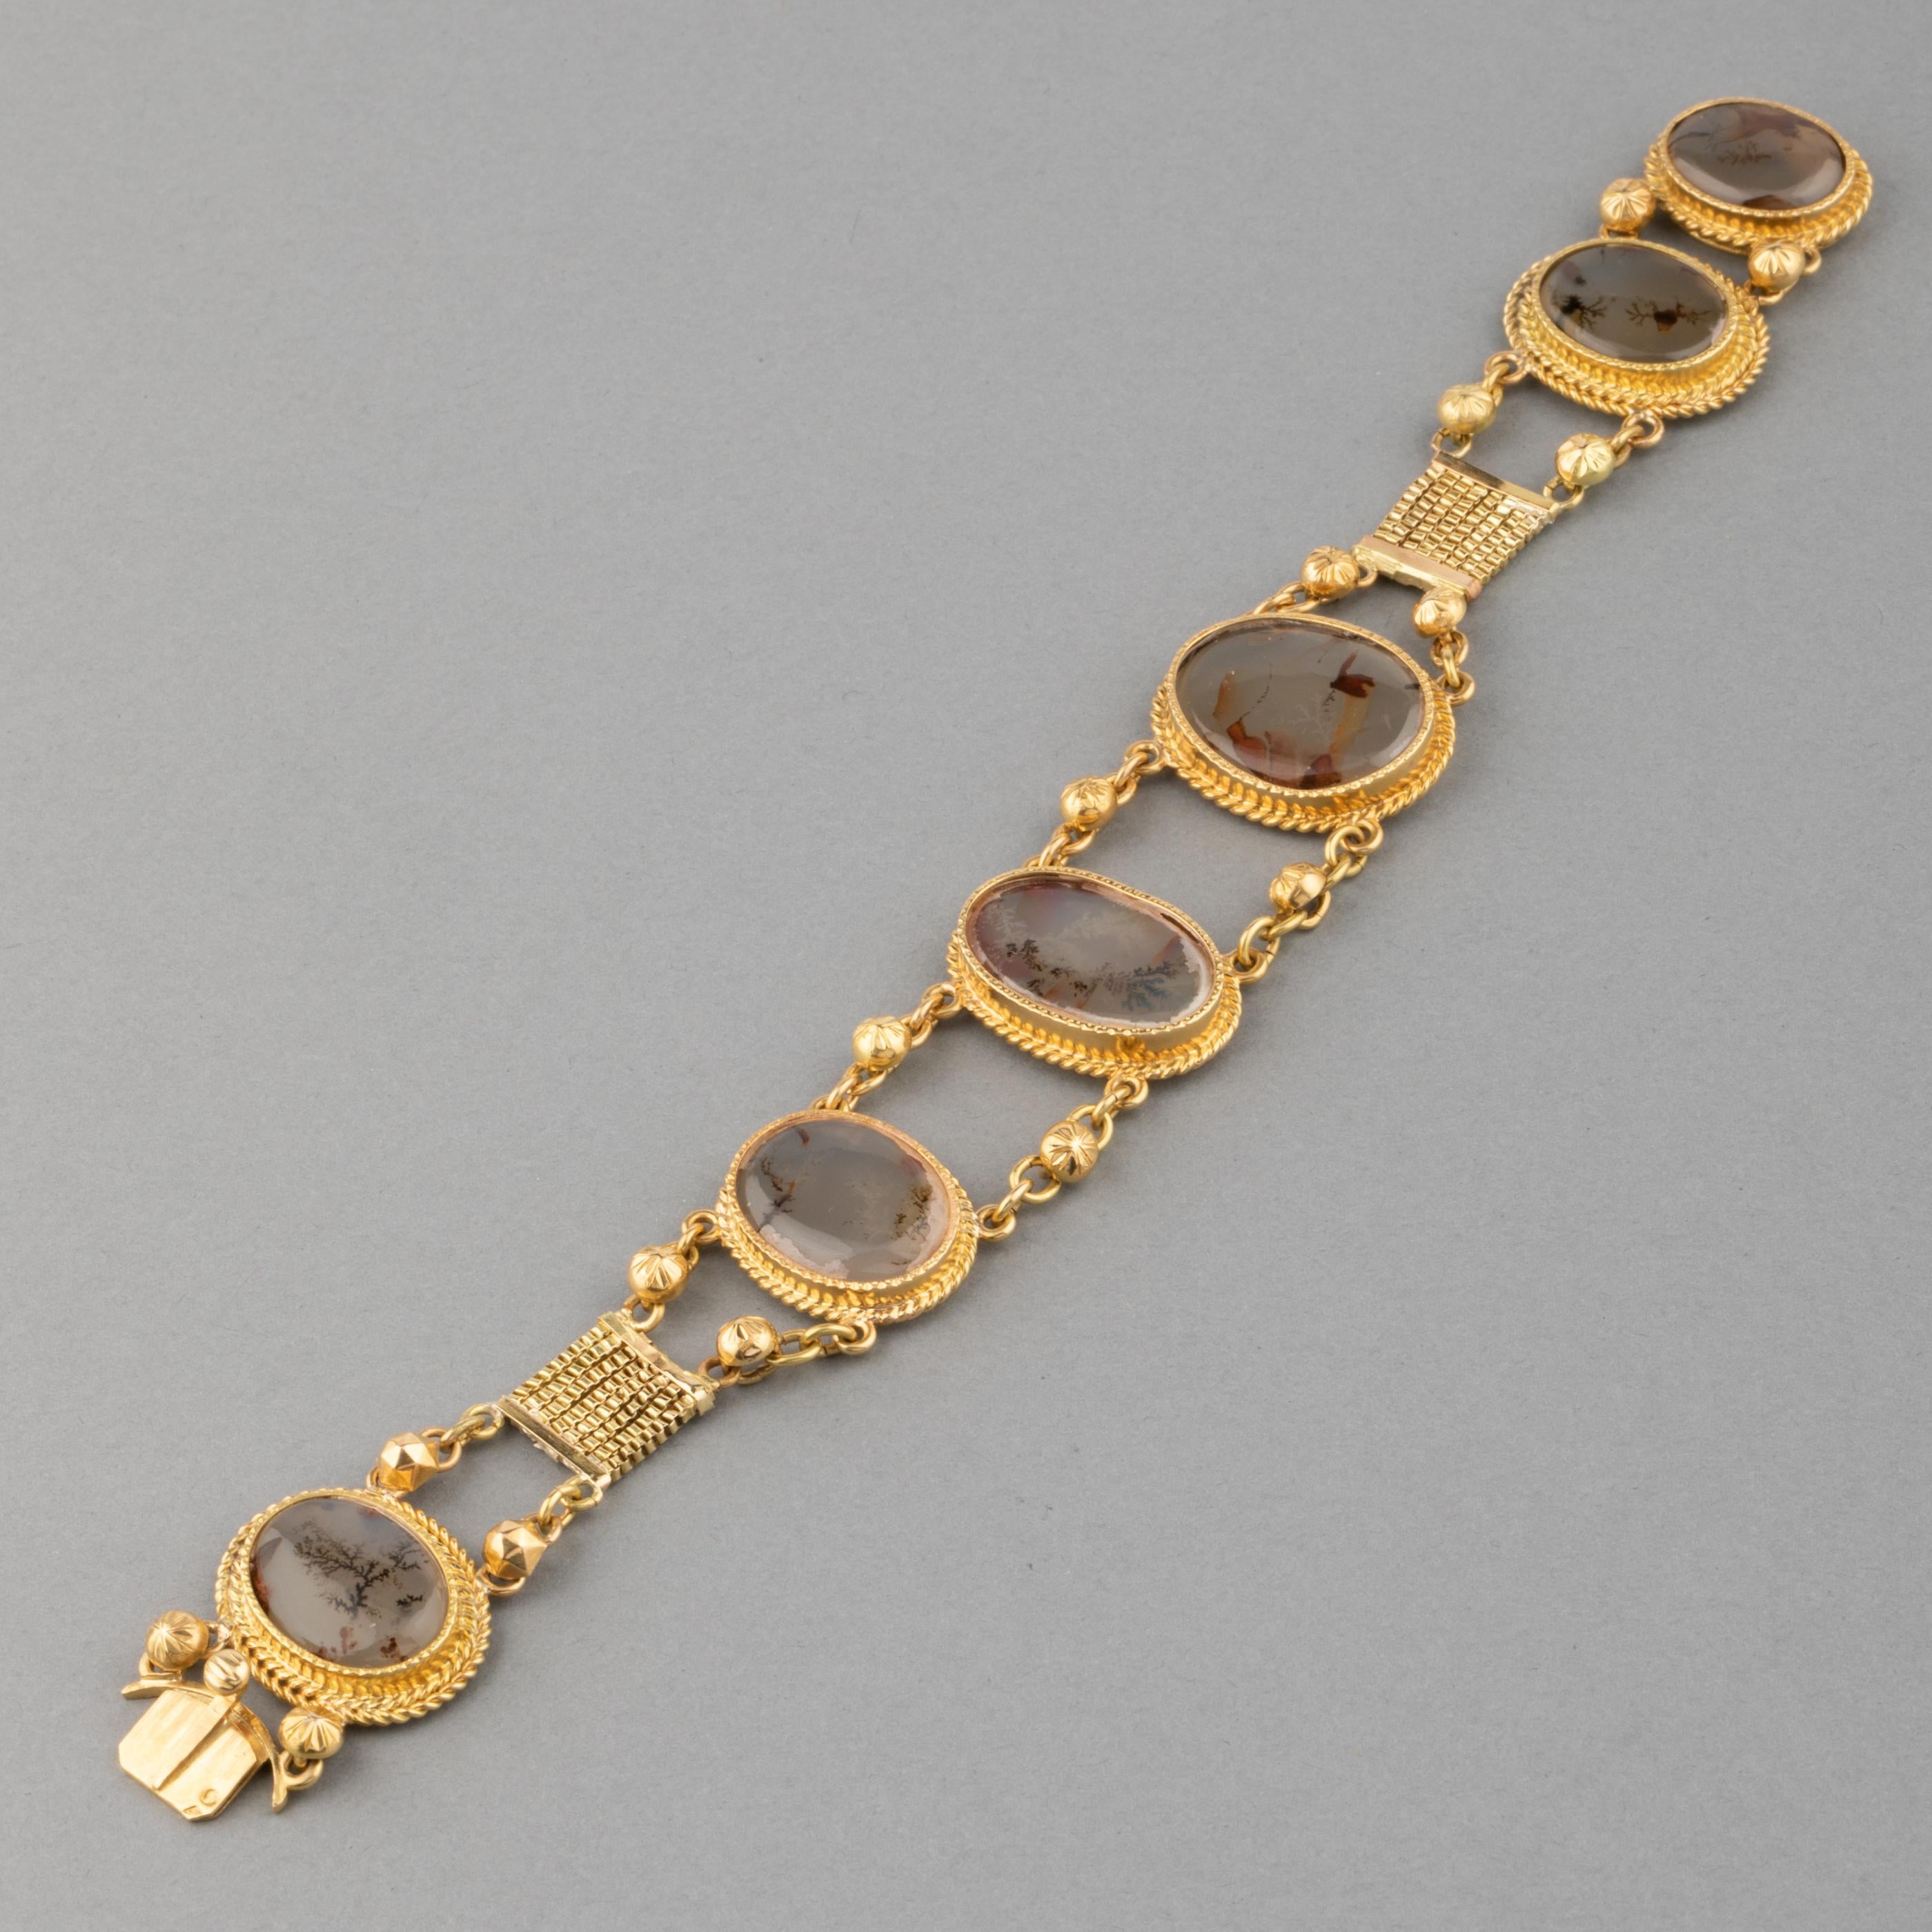 A very beautiful antique bracelet, made in France circa 1870.

Made in yellow gold 18k, multiple hallmarks for gold 18k (3 eagle heads, hallmark of maker).

Wrist size: 18cm

Weight: 33.30 grams